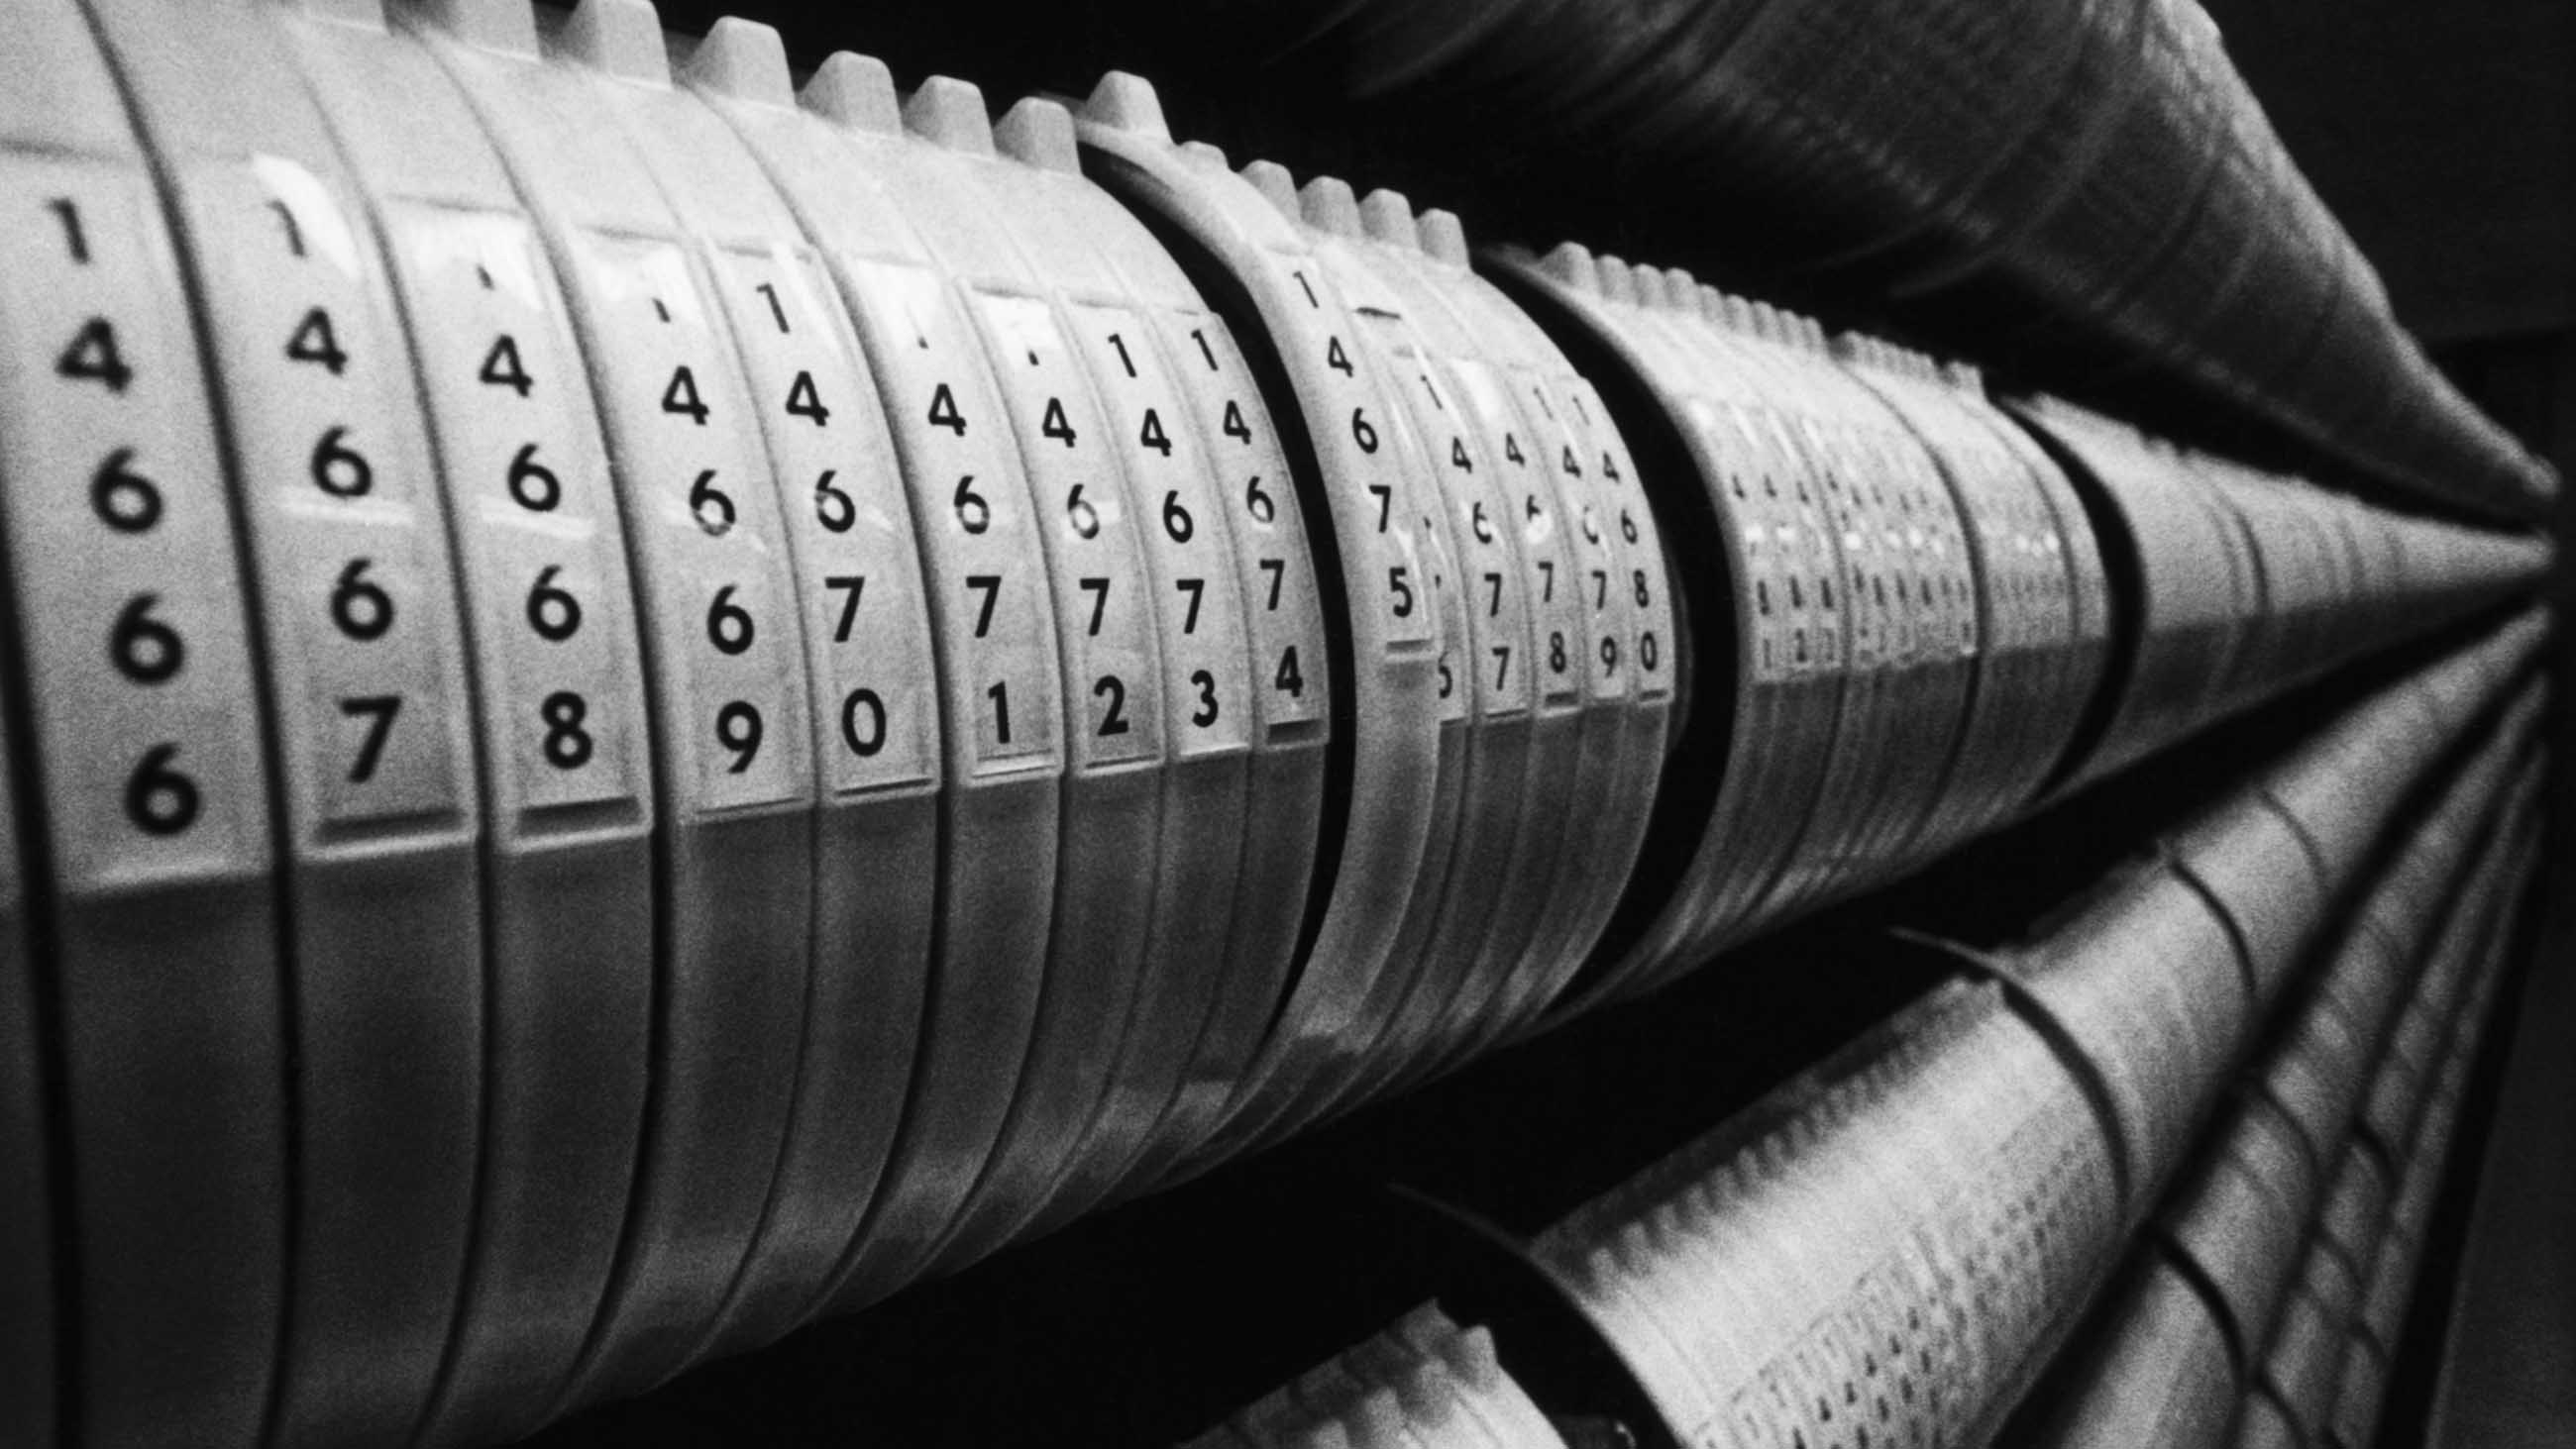 Photograph displaying long, numbered rolls of computer tape used in early computers. Undated photograph.